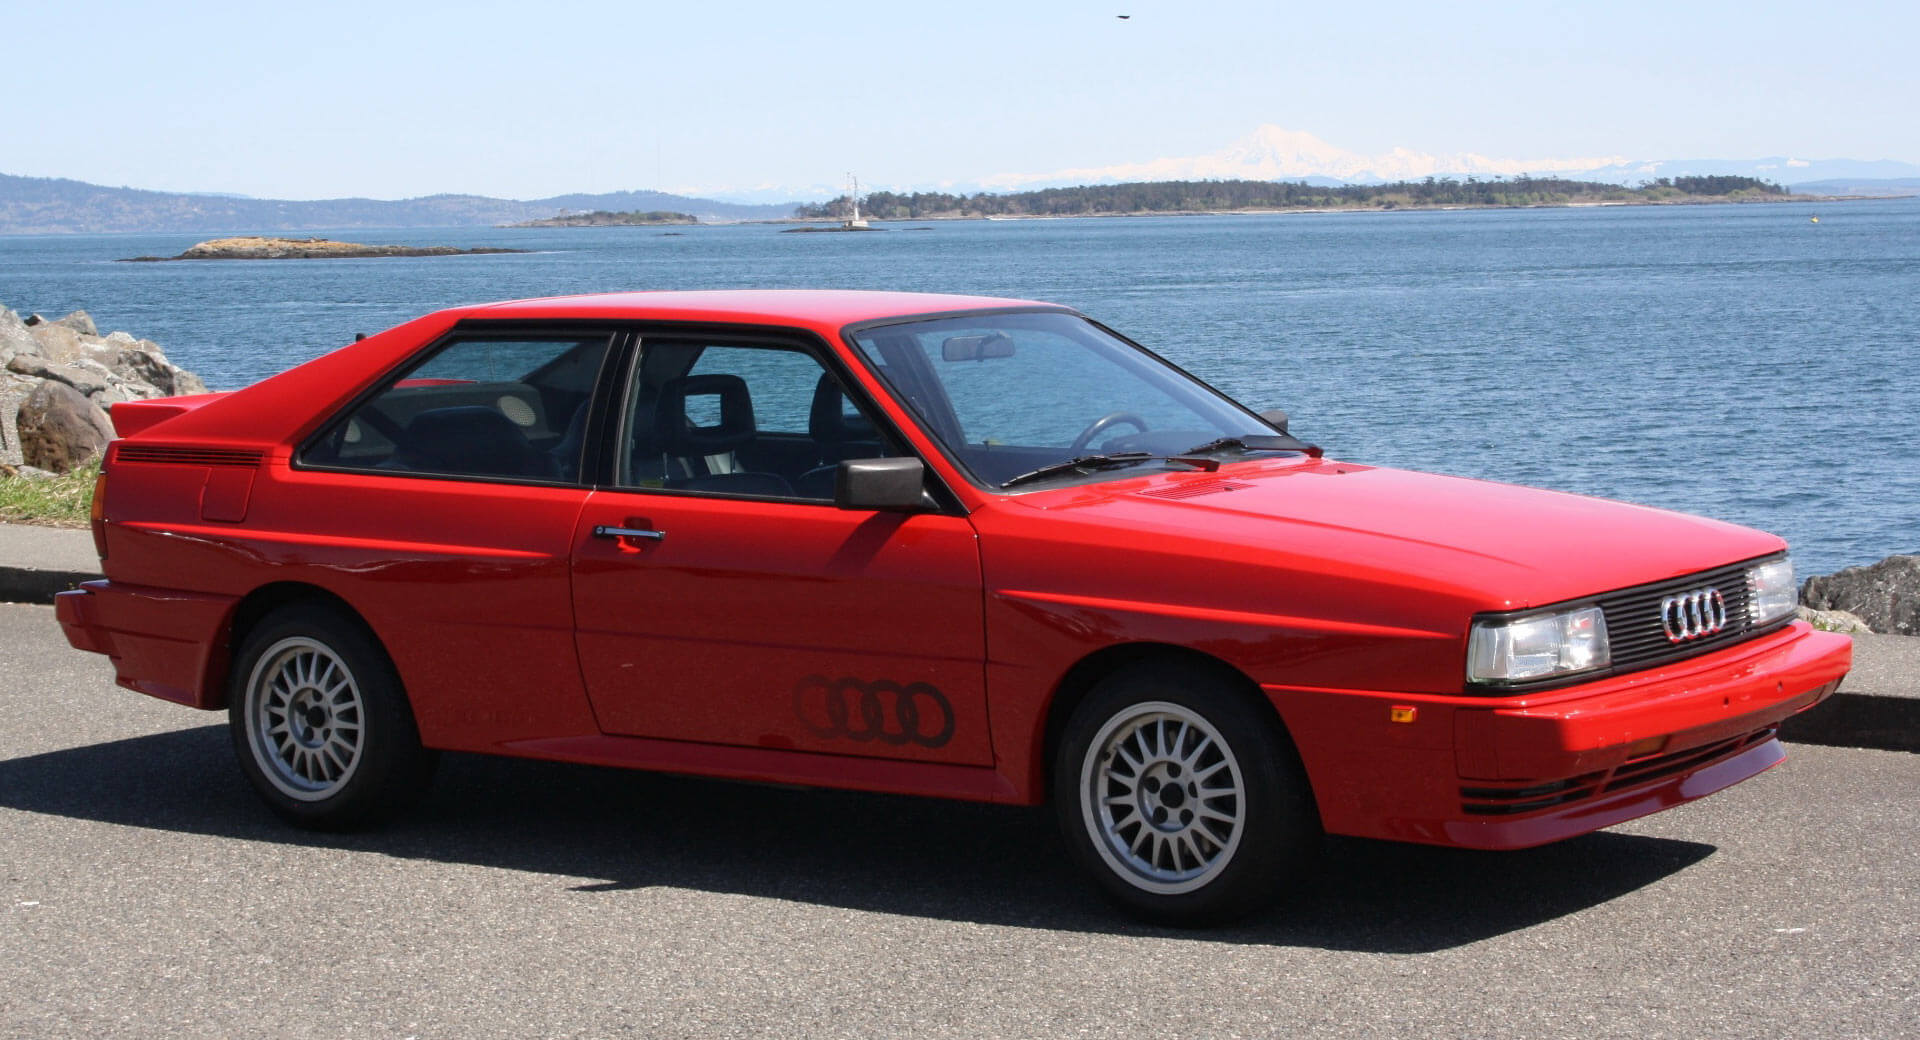 Bid On This 1985 Audi Quattro And Fulfill Rally Dreams |